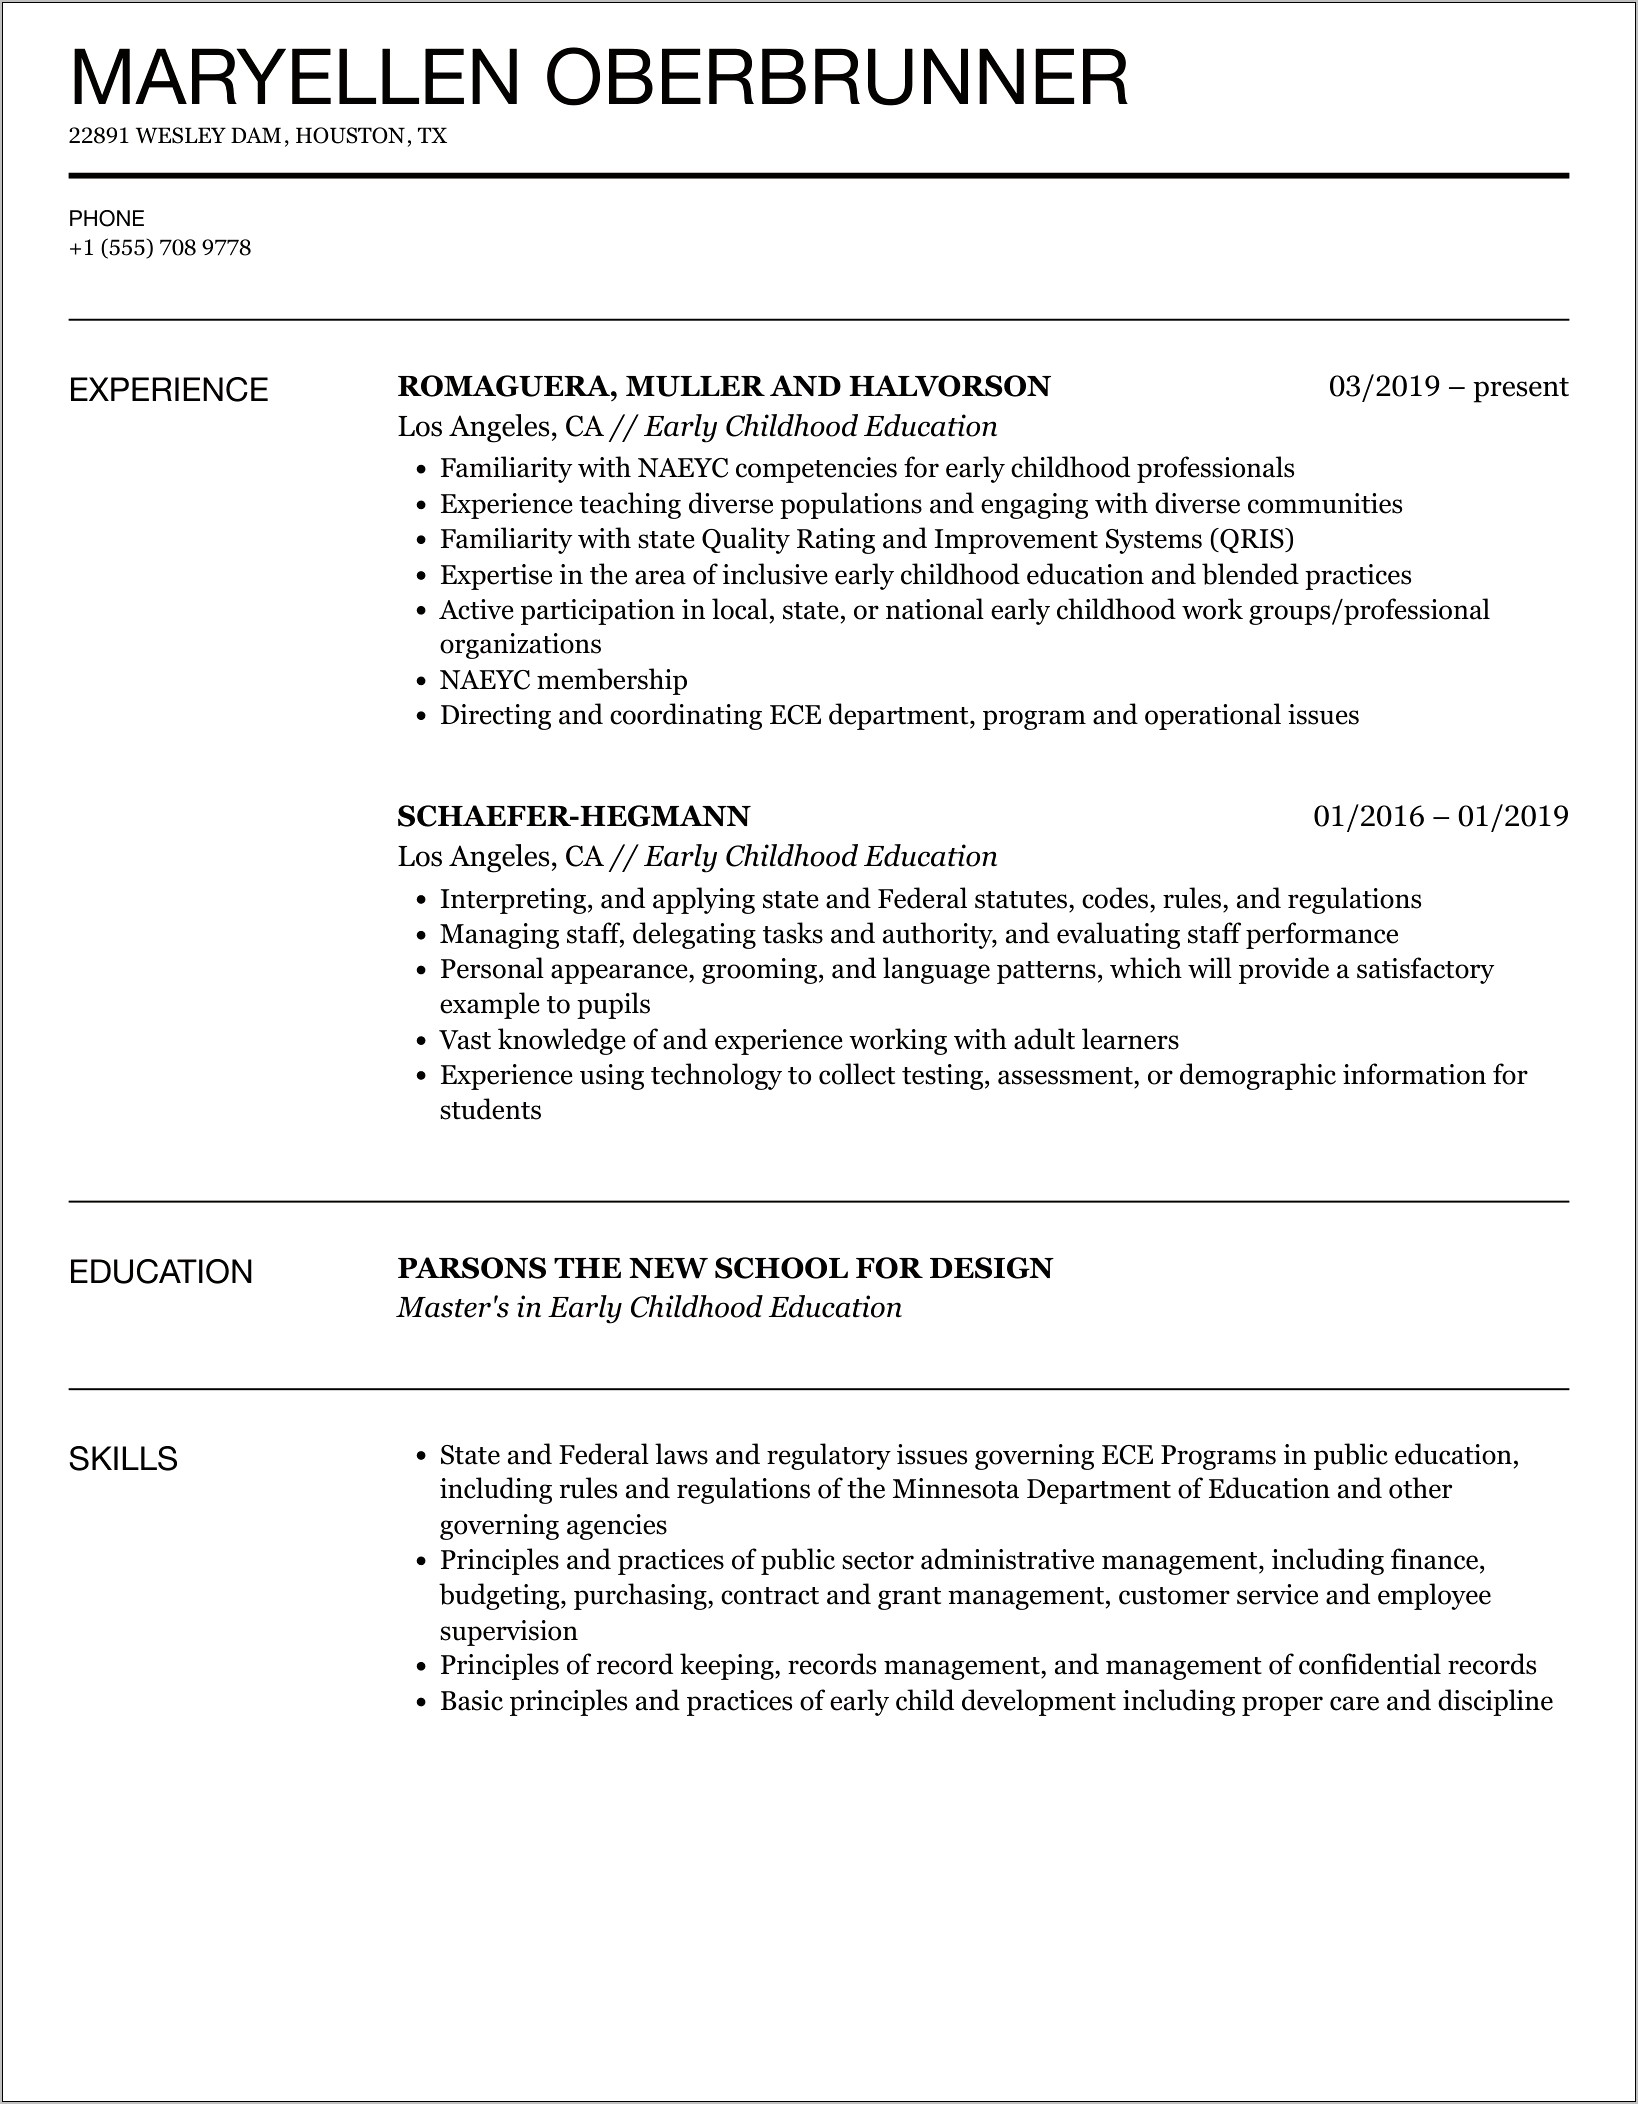 Example Education Section Of Resume